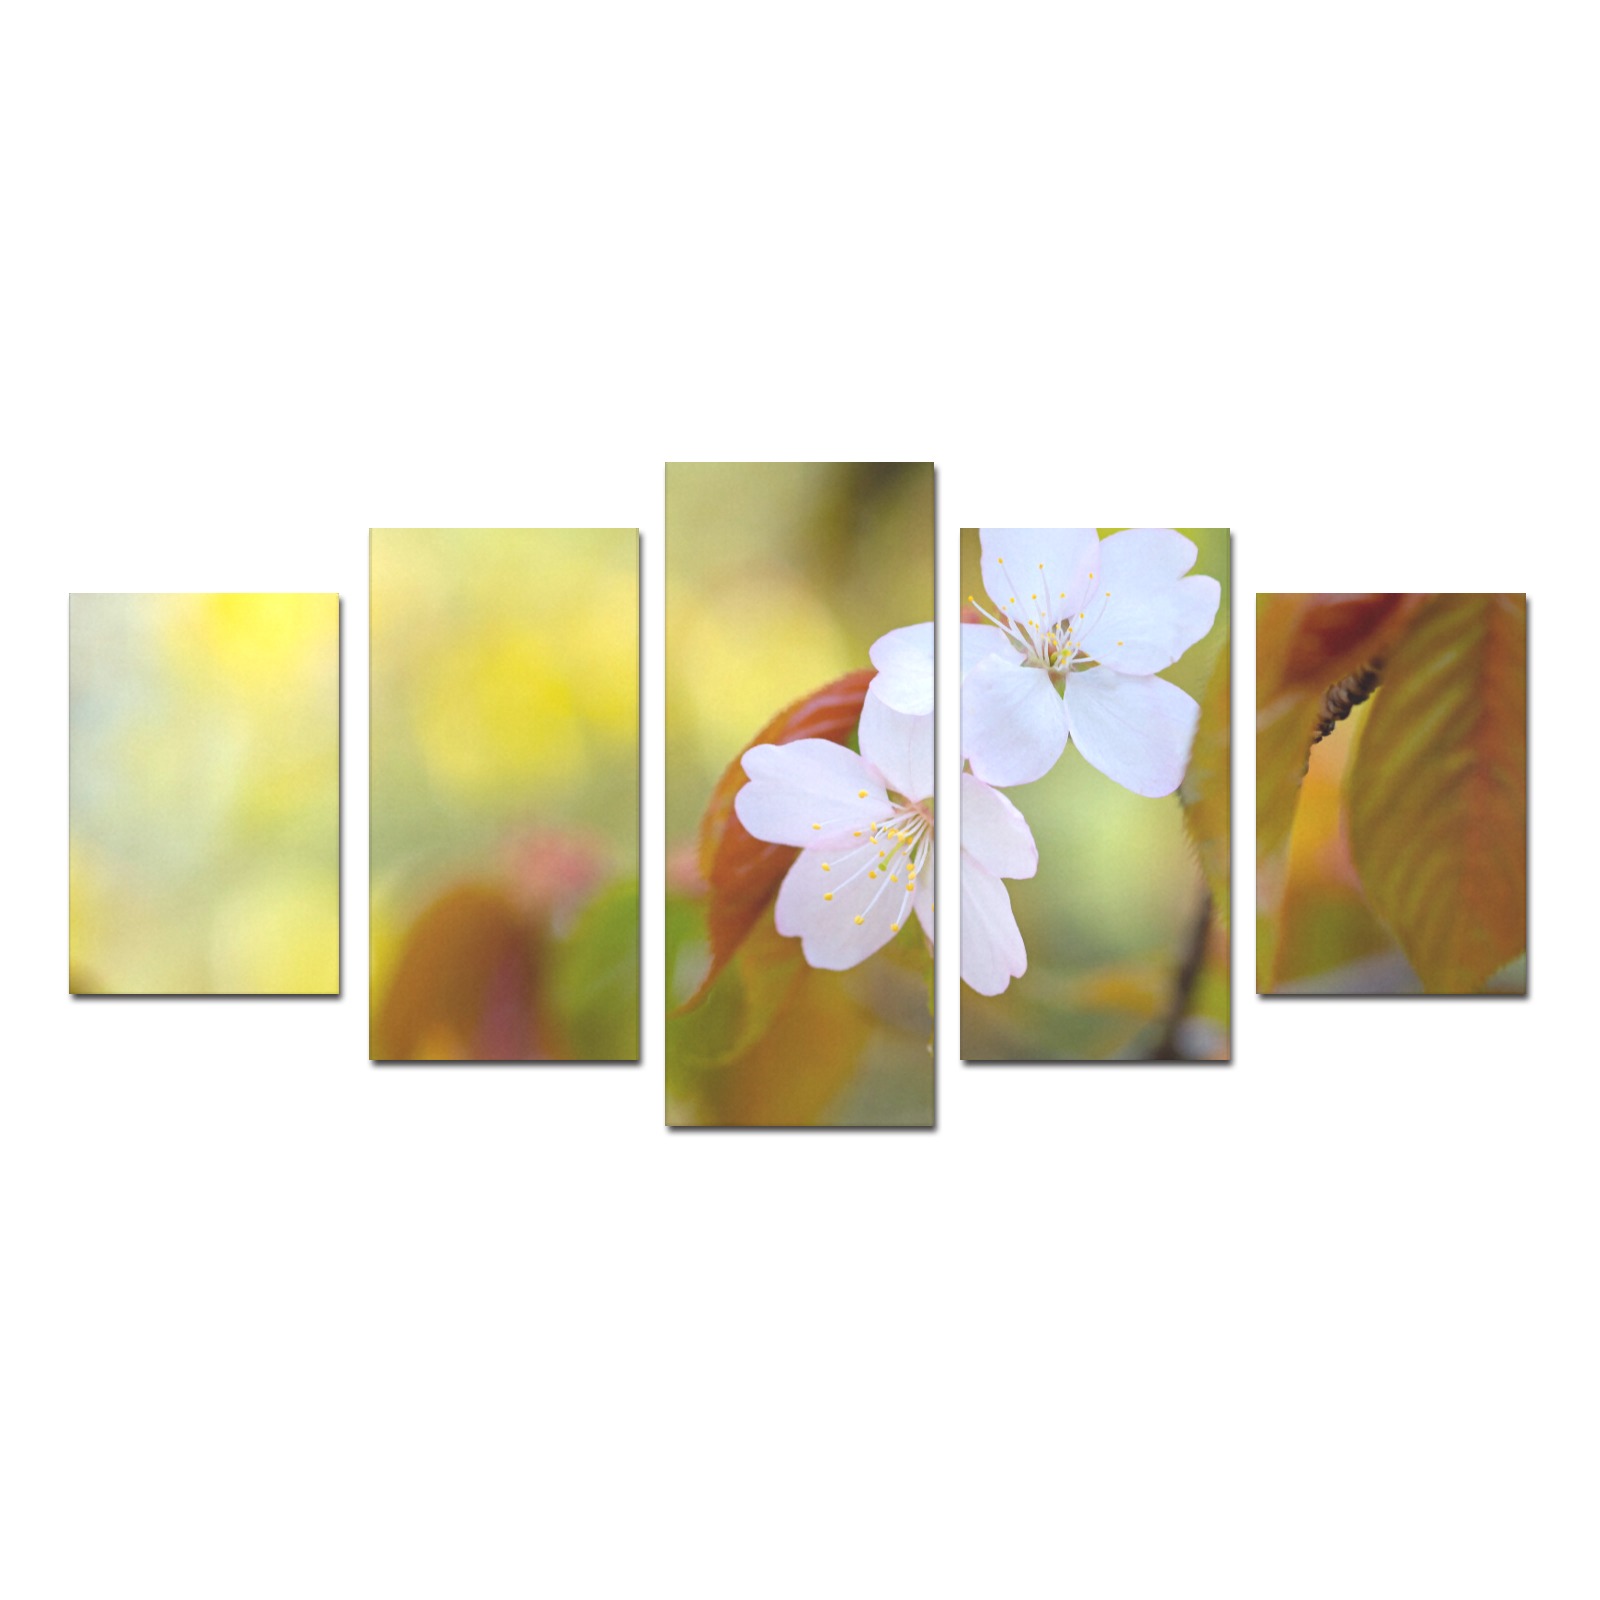 Two sakura cherry flowers, colorful background. Canvas Print Sets D (No Frame)